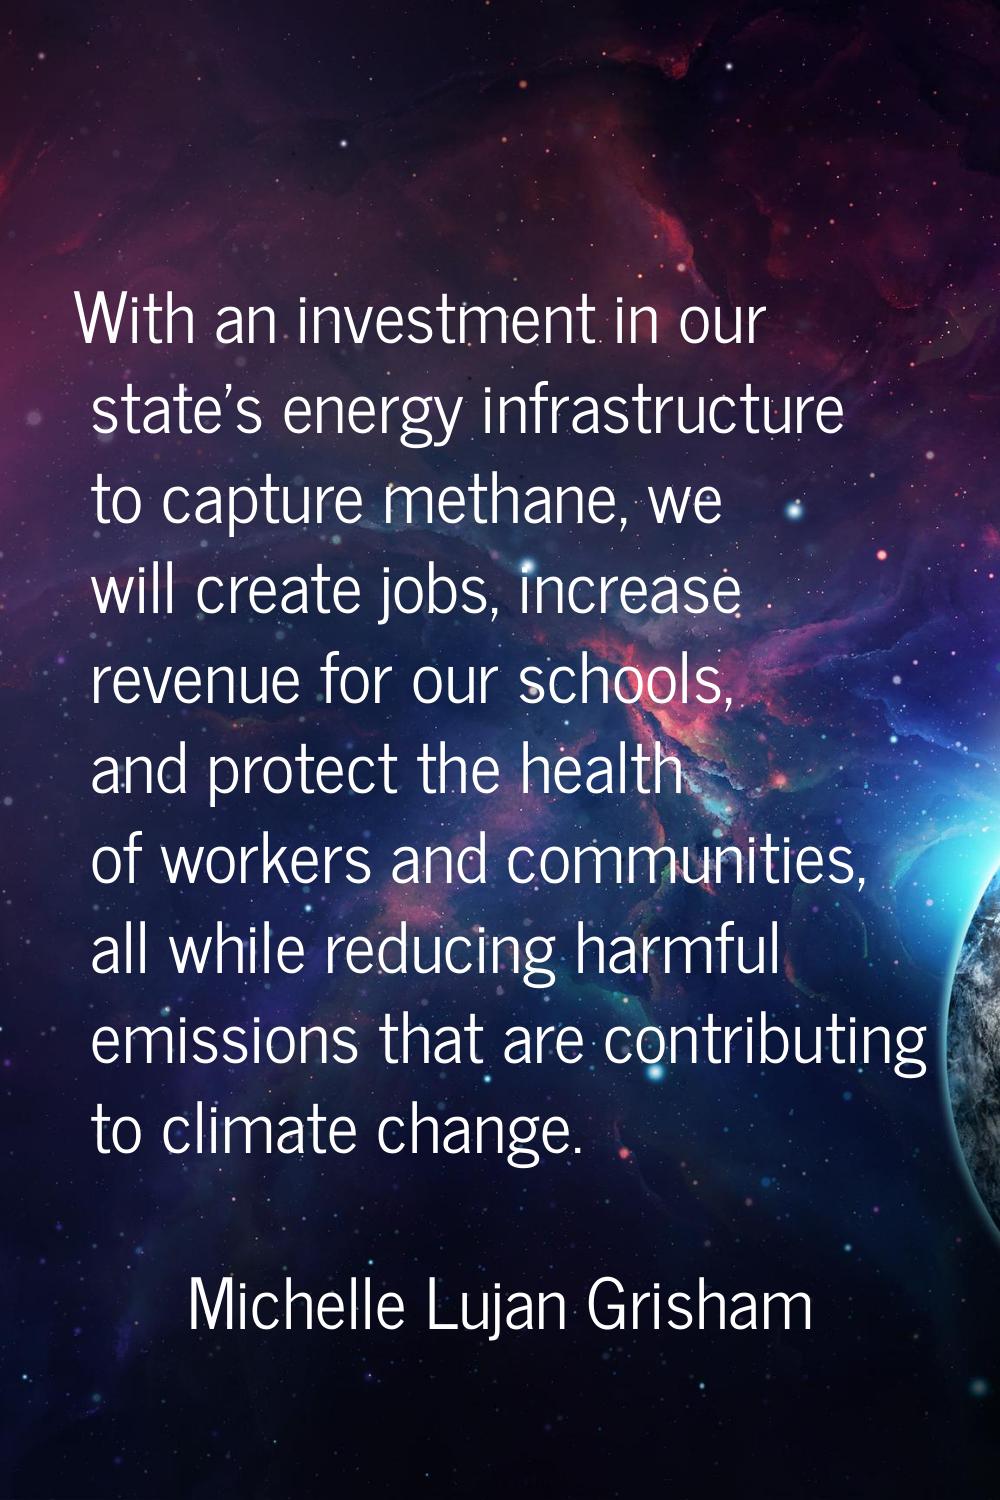 With an investment in our state's energy infrastructure to capture methane, we will create jobs, in